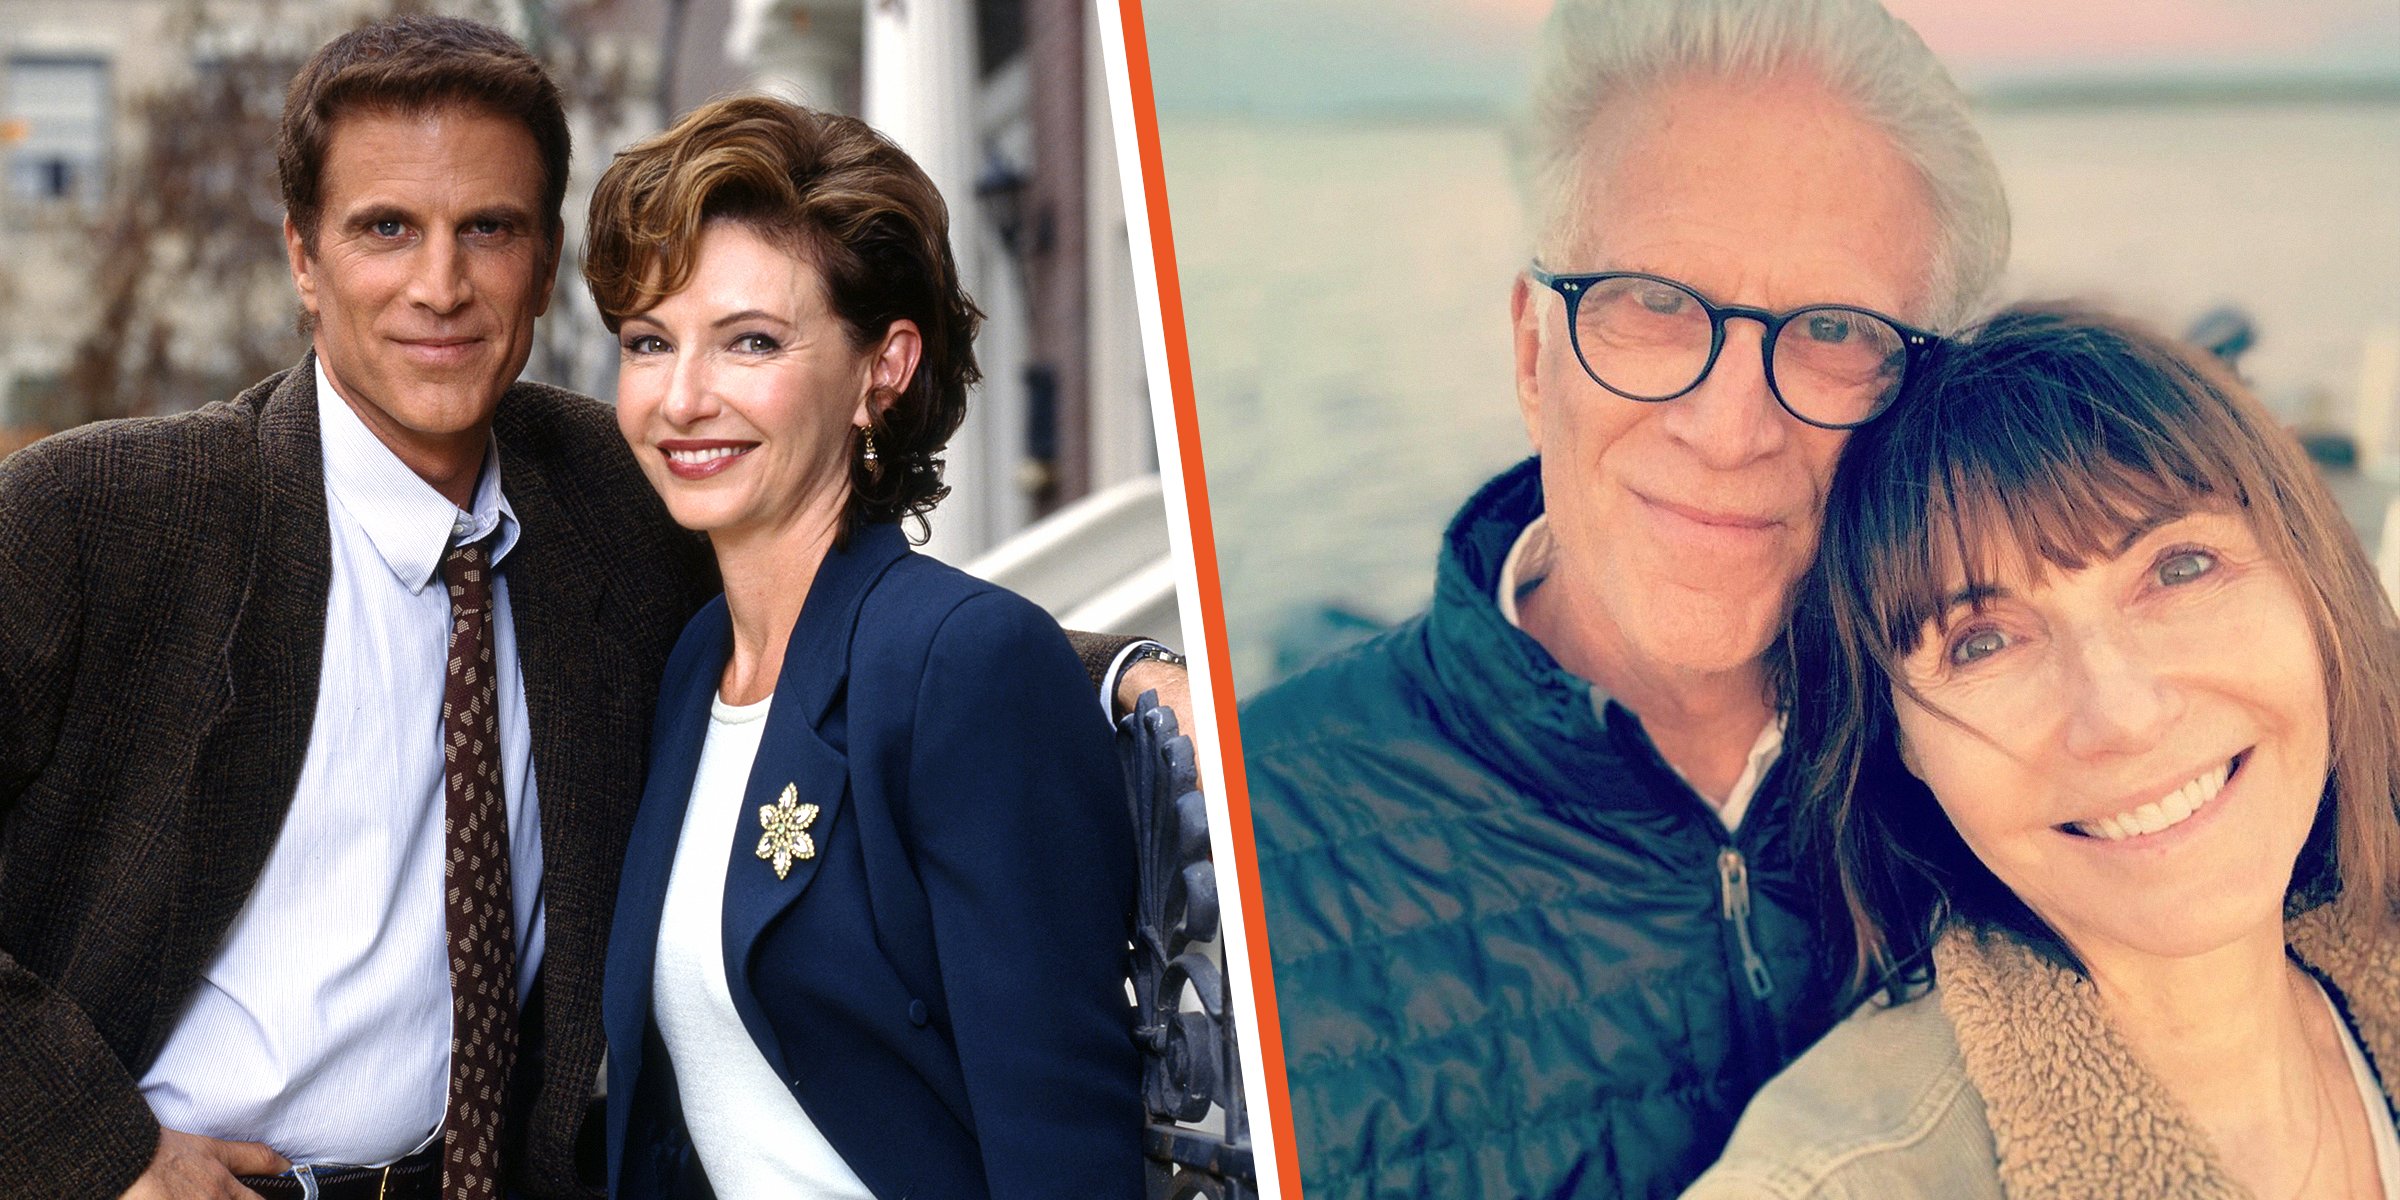 Ted Danson and Mary Steenburgen, 1996 and 2019 | Source: Instagram.com/mary_steenburgen | Getty Images